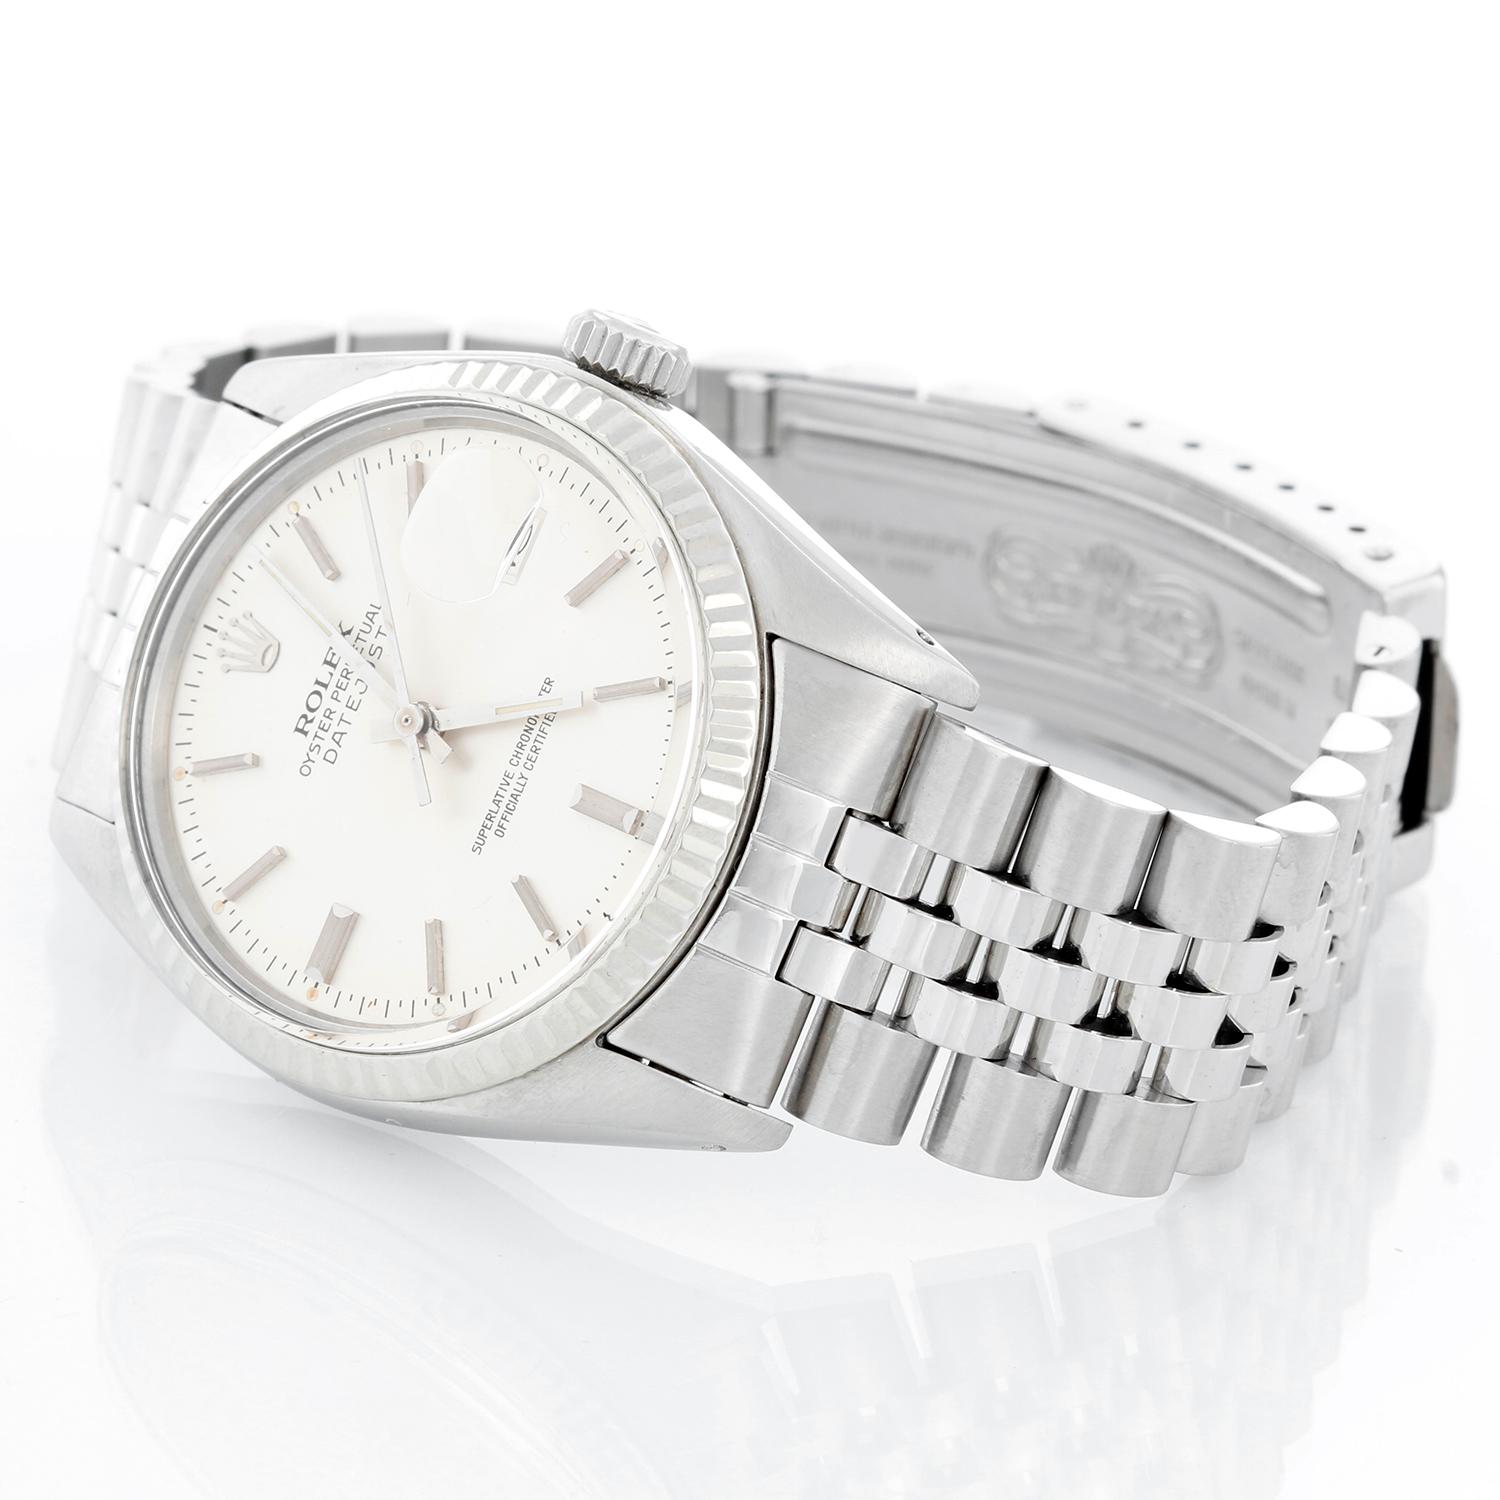 Rolex Datejust Men's Stainless Steel Watch 16014 - Automatic winding, 27 jewels, Quickset, acrylic crystal. Stainless steel with white gold fluted bezel . (36 mm ) Silver dial with stick hour markers. Stainless steel Jubilee bracelet. Pre-owned with